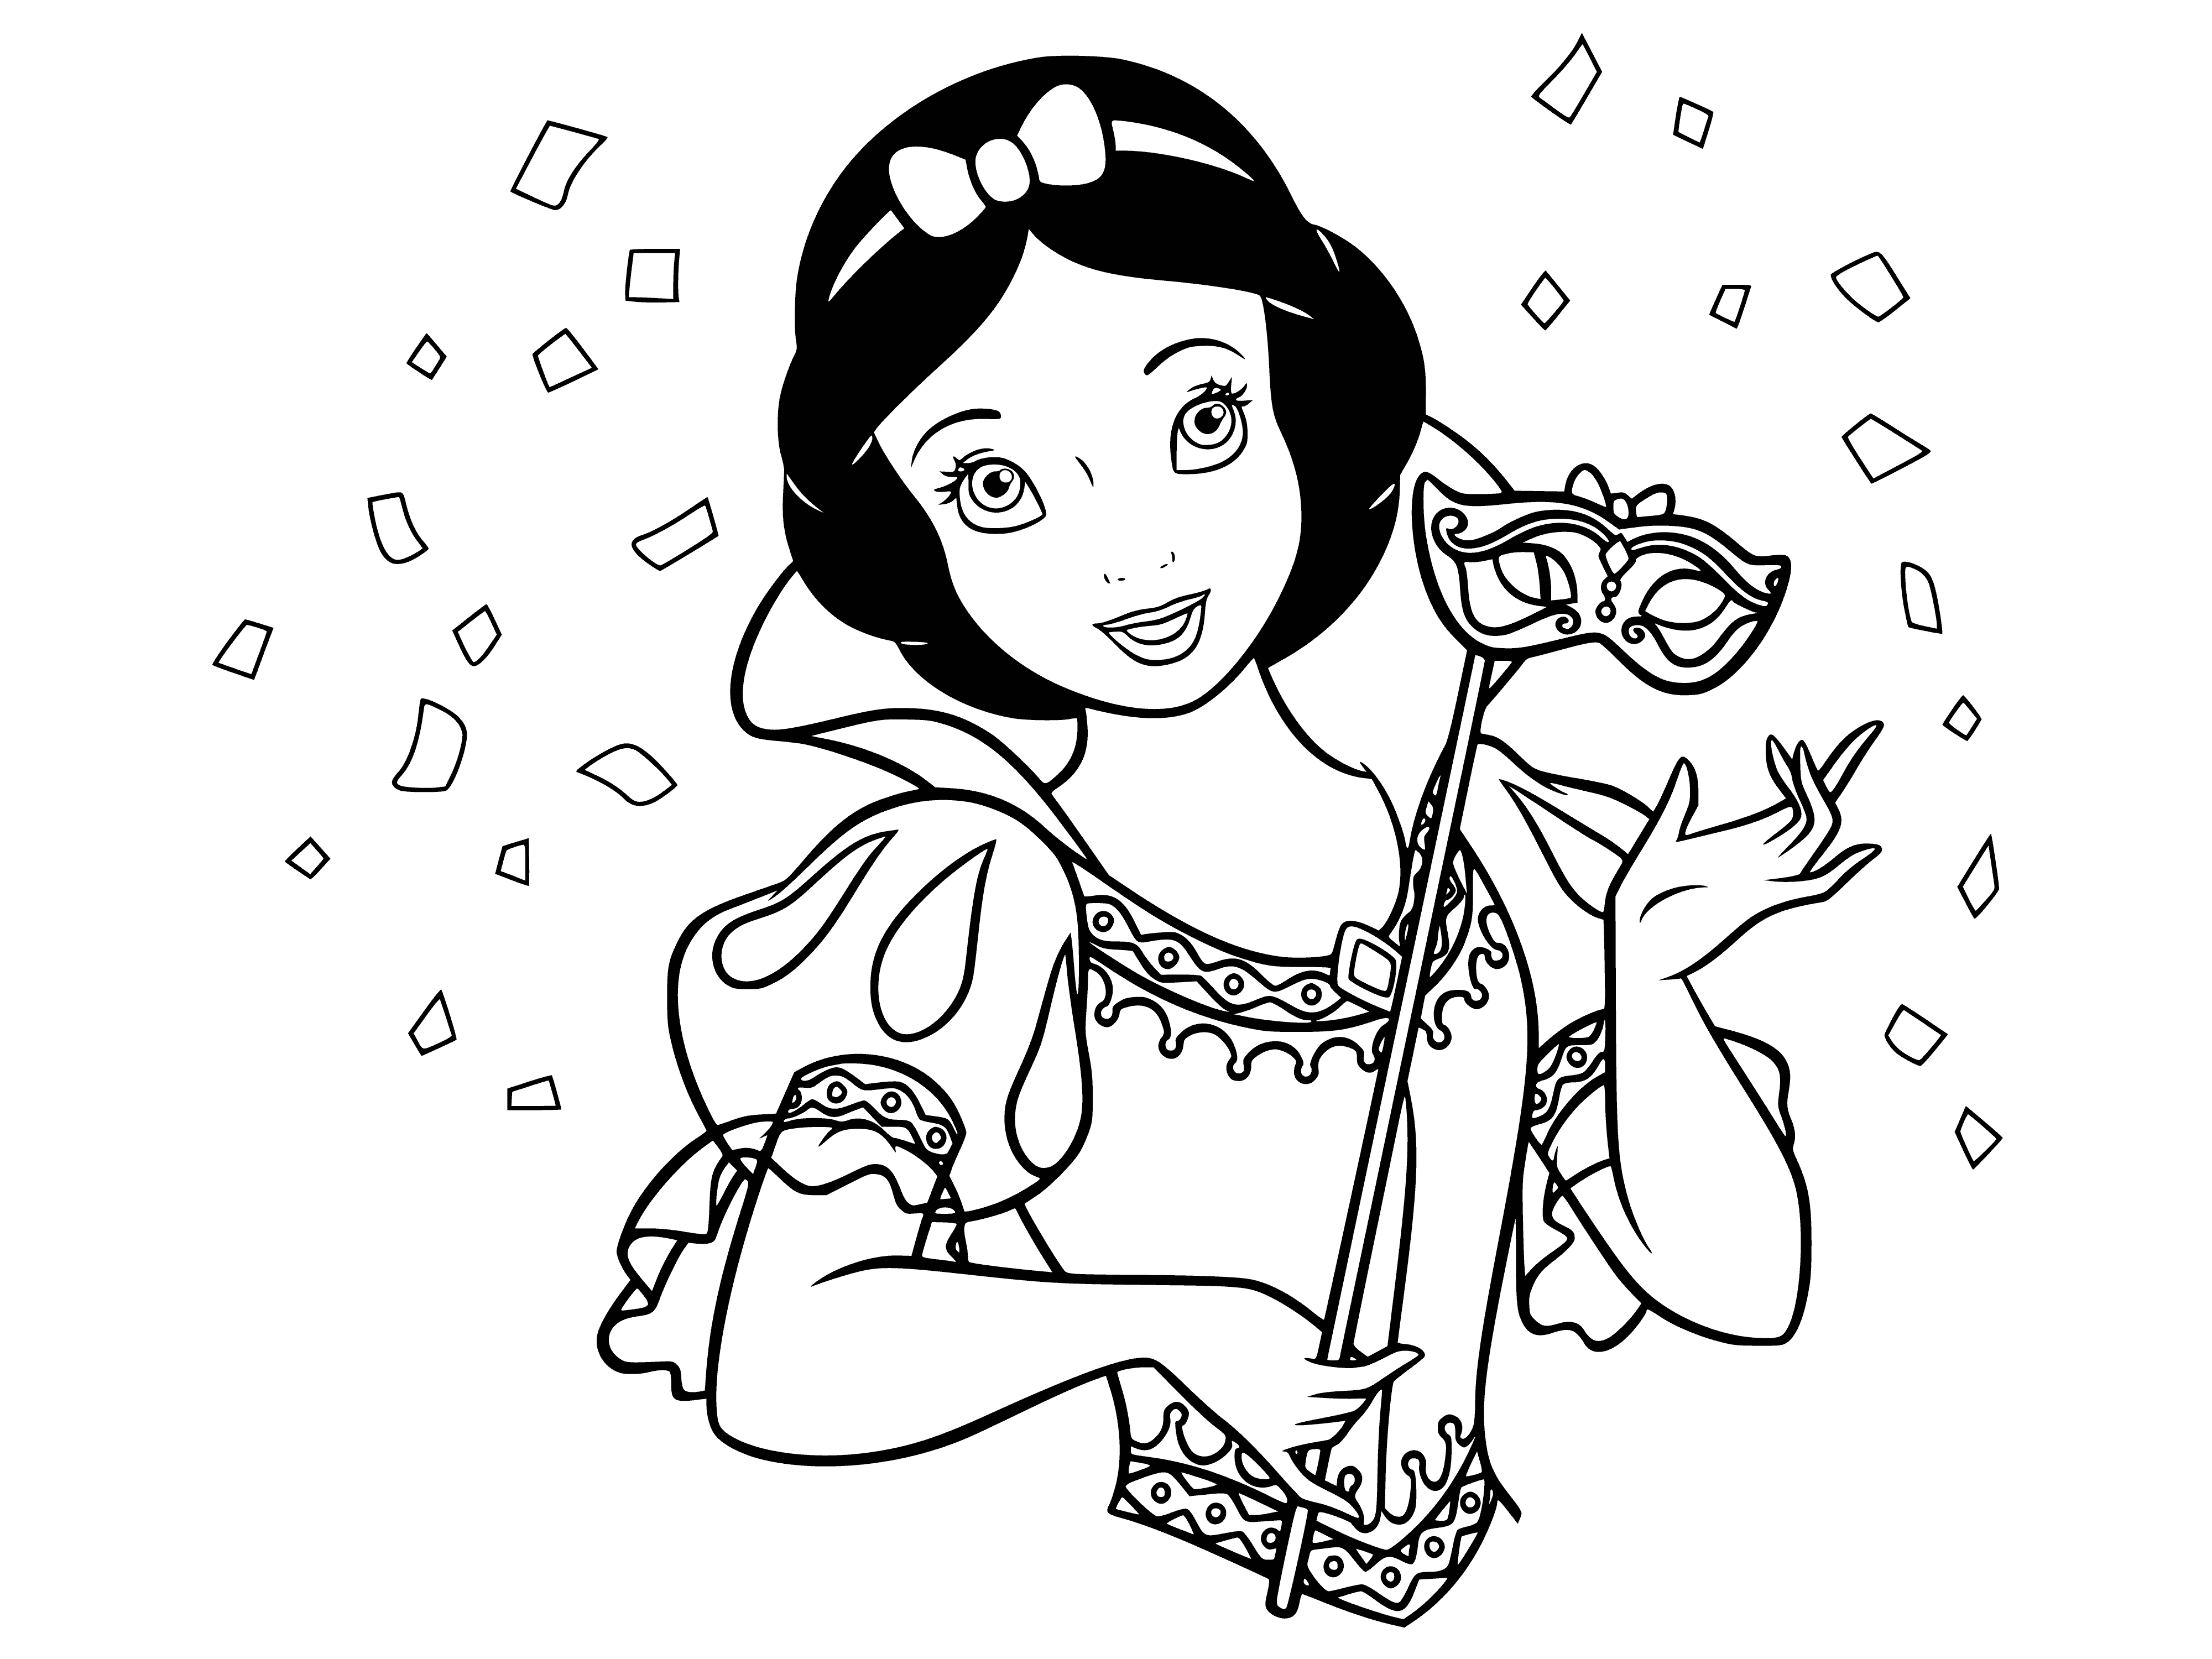 coloring page: Snow White stands in the middle of a forest, surrounded by the seven dwarfs as she tells them a story. Each dwarf is distinctively portrayed, representing a different personality. The coloring page features a serene setting, perfect for a peaceful creativity session.